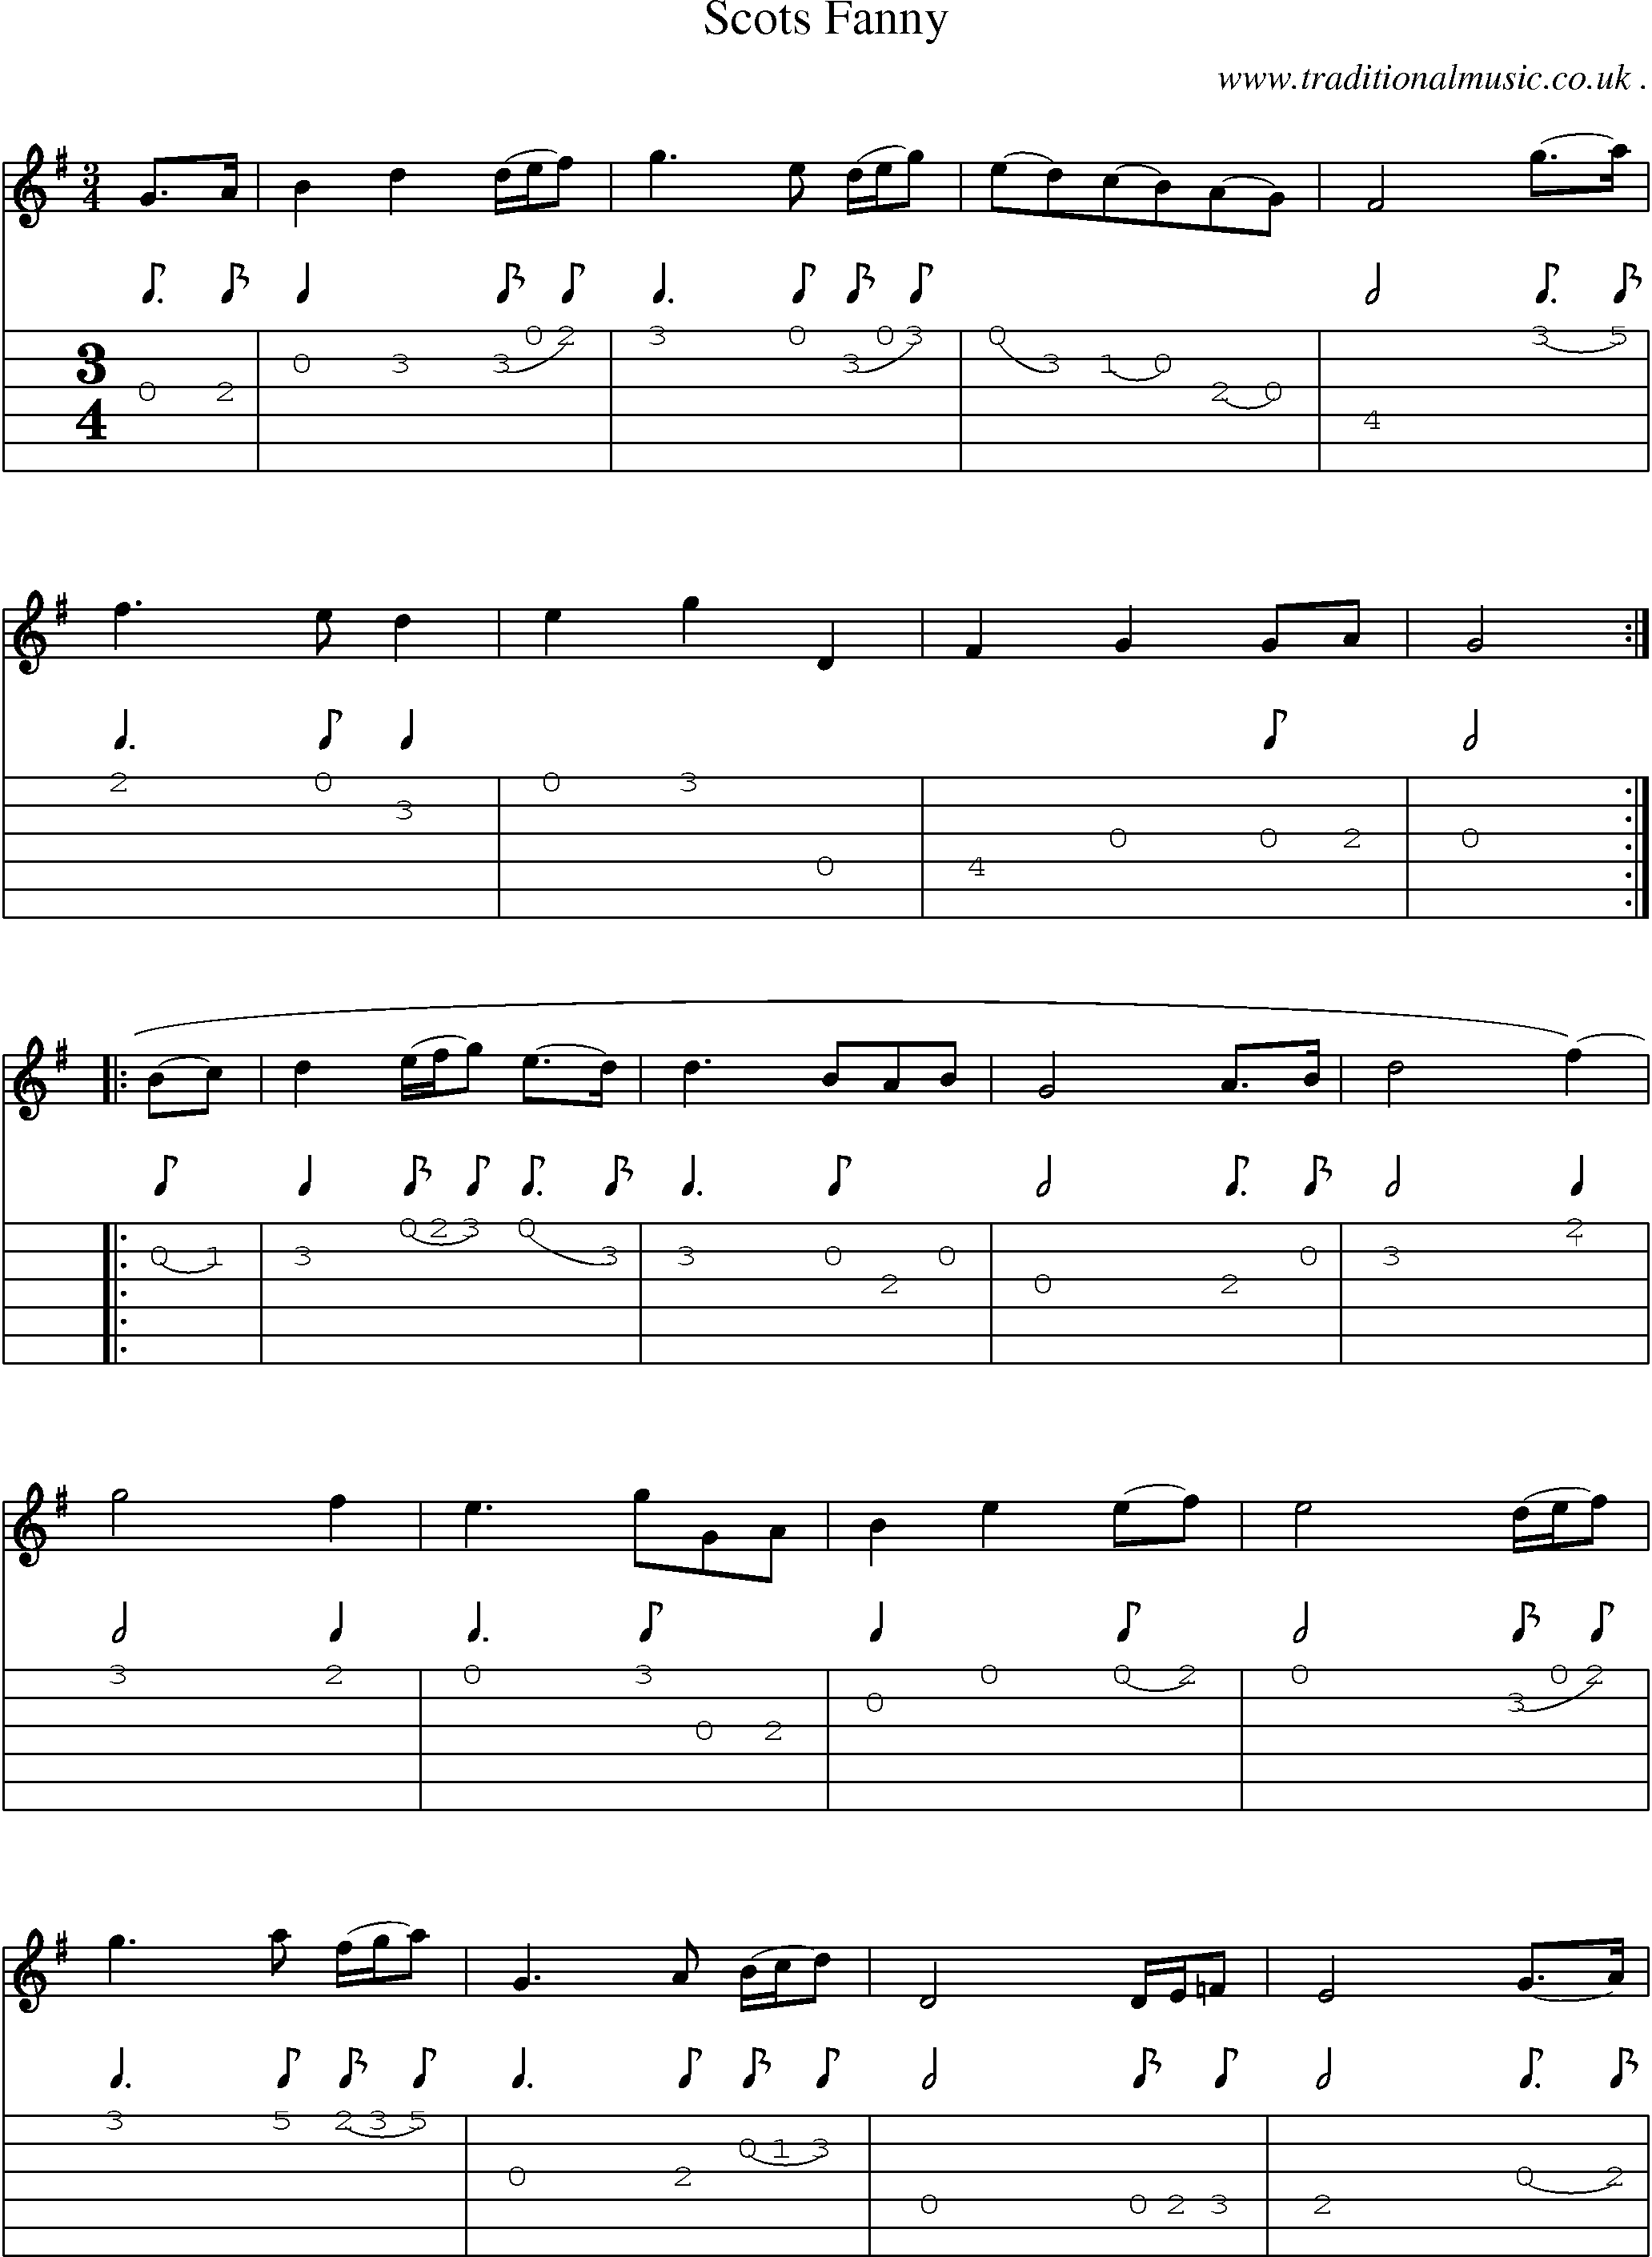 Sheet-Music and Guitar Tabs for Scots Fanny